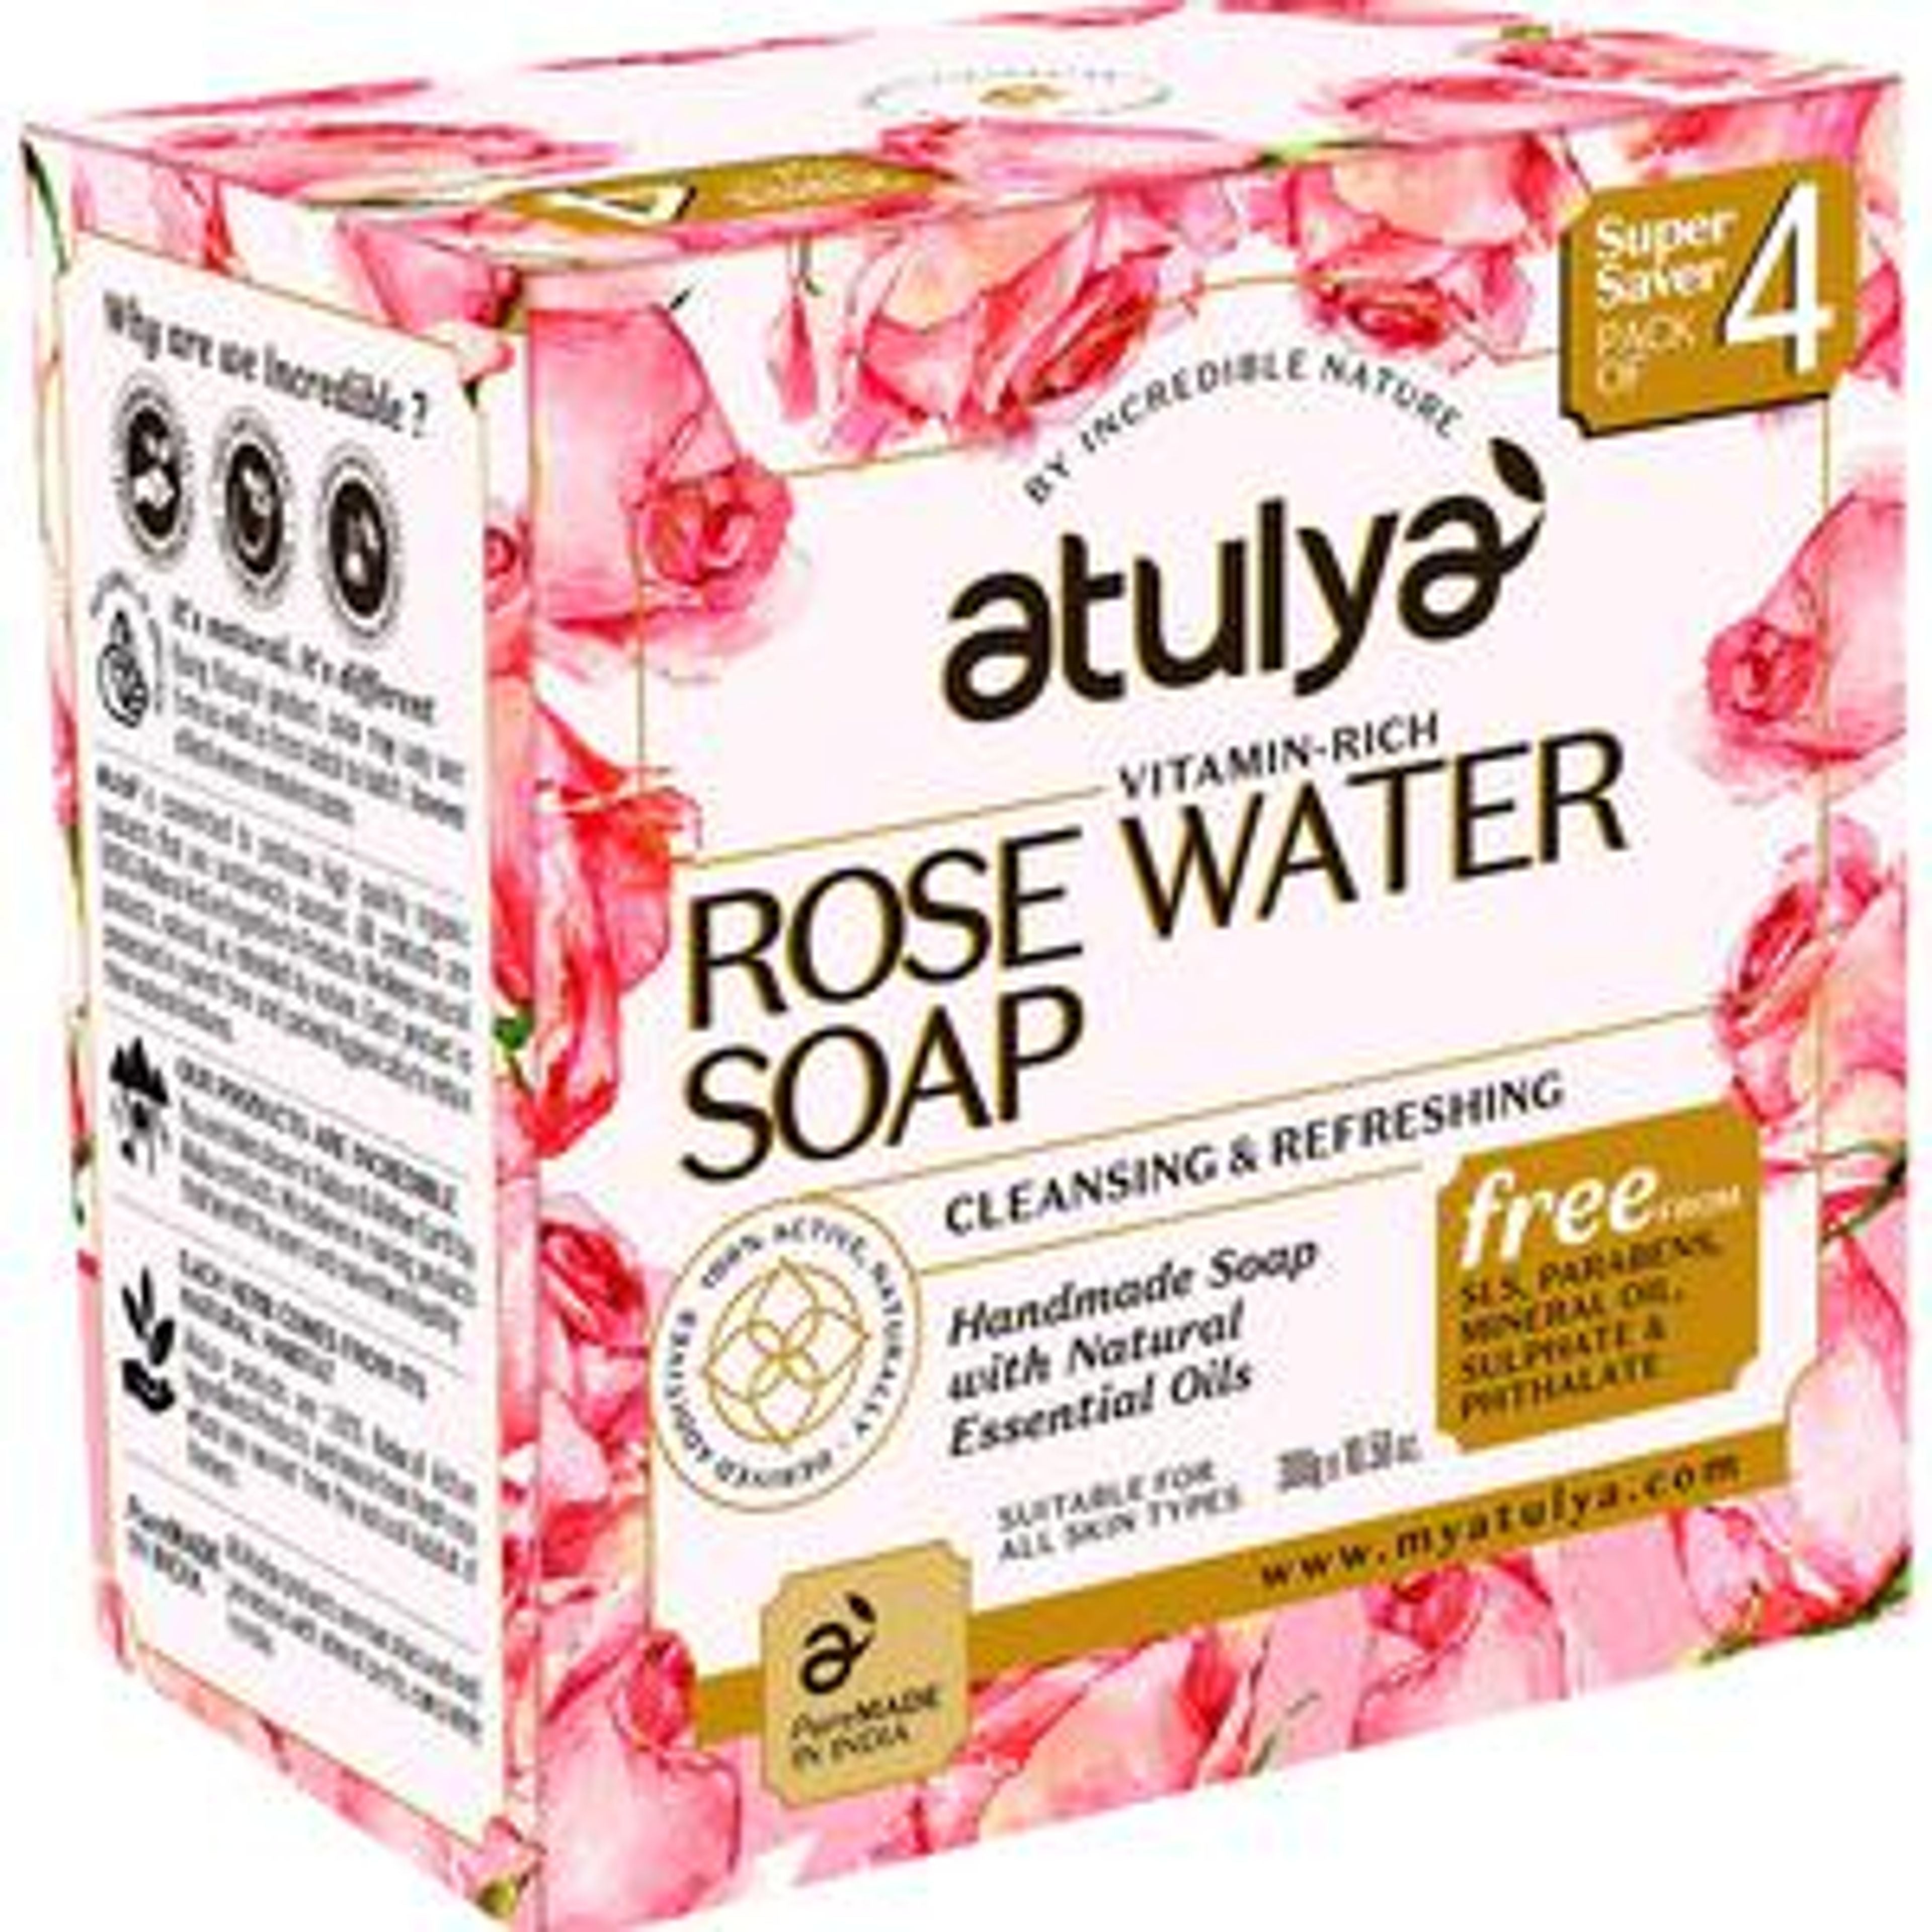 ATULYA Vitamin Rich Rose Water Soap - Cleansing & Refreshing, Value Pack